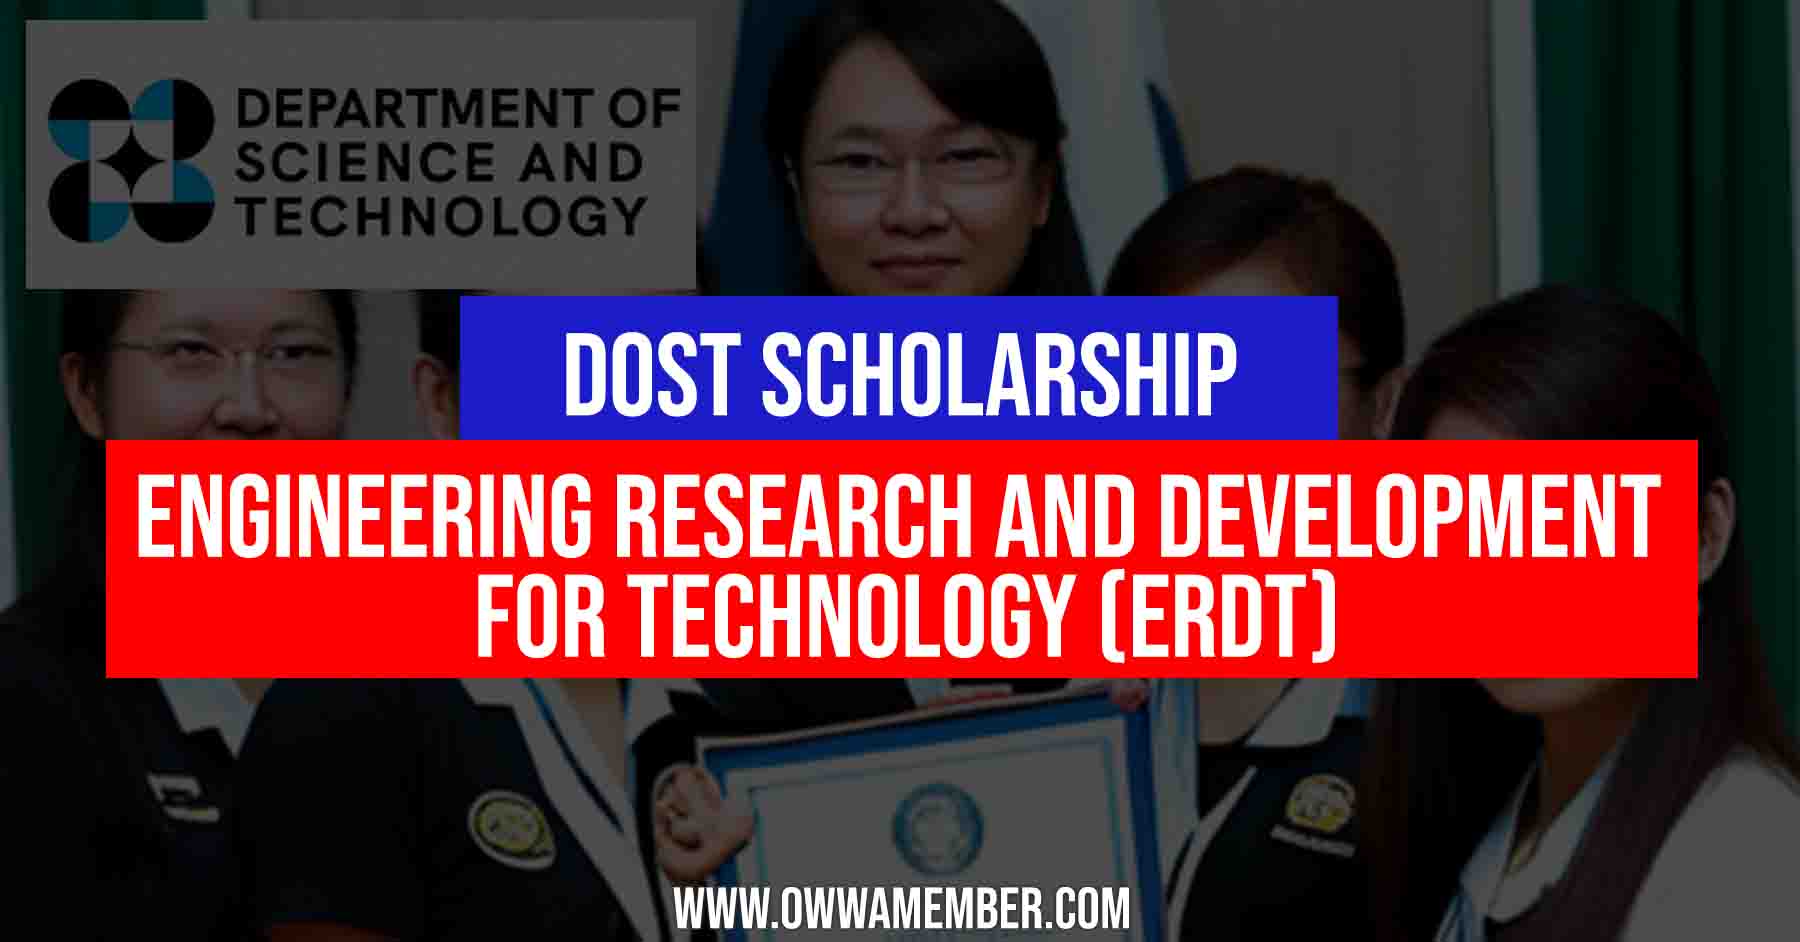 dost Engineering Research and Development for Technology scholarship